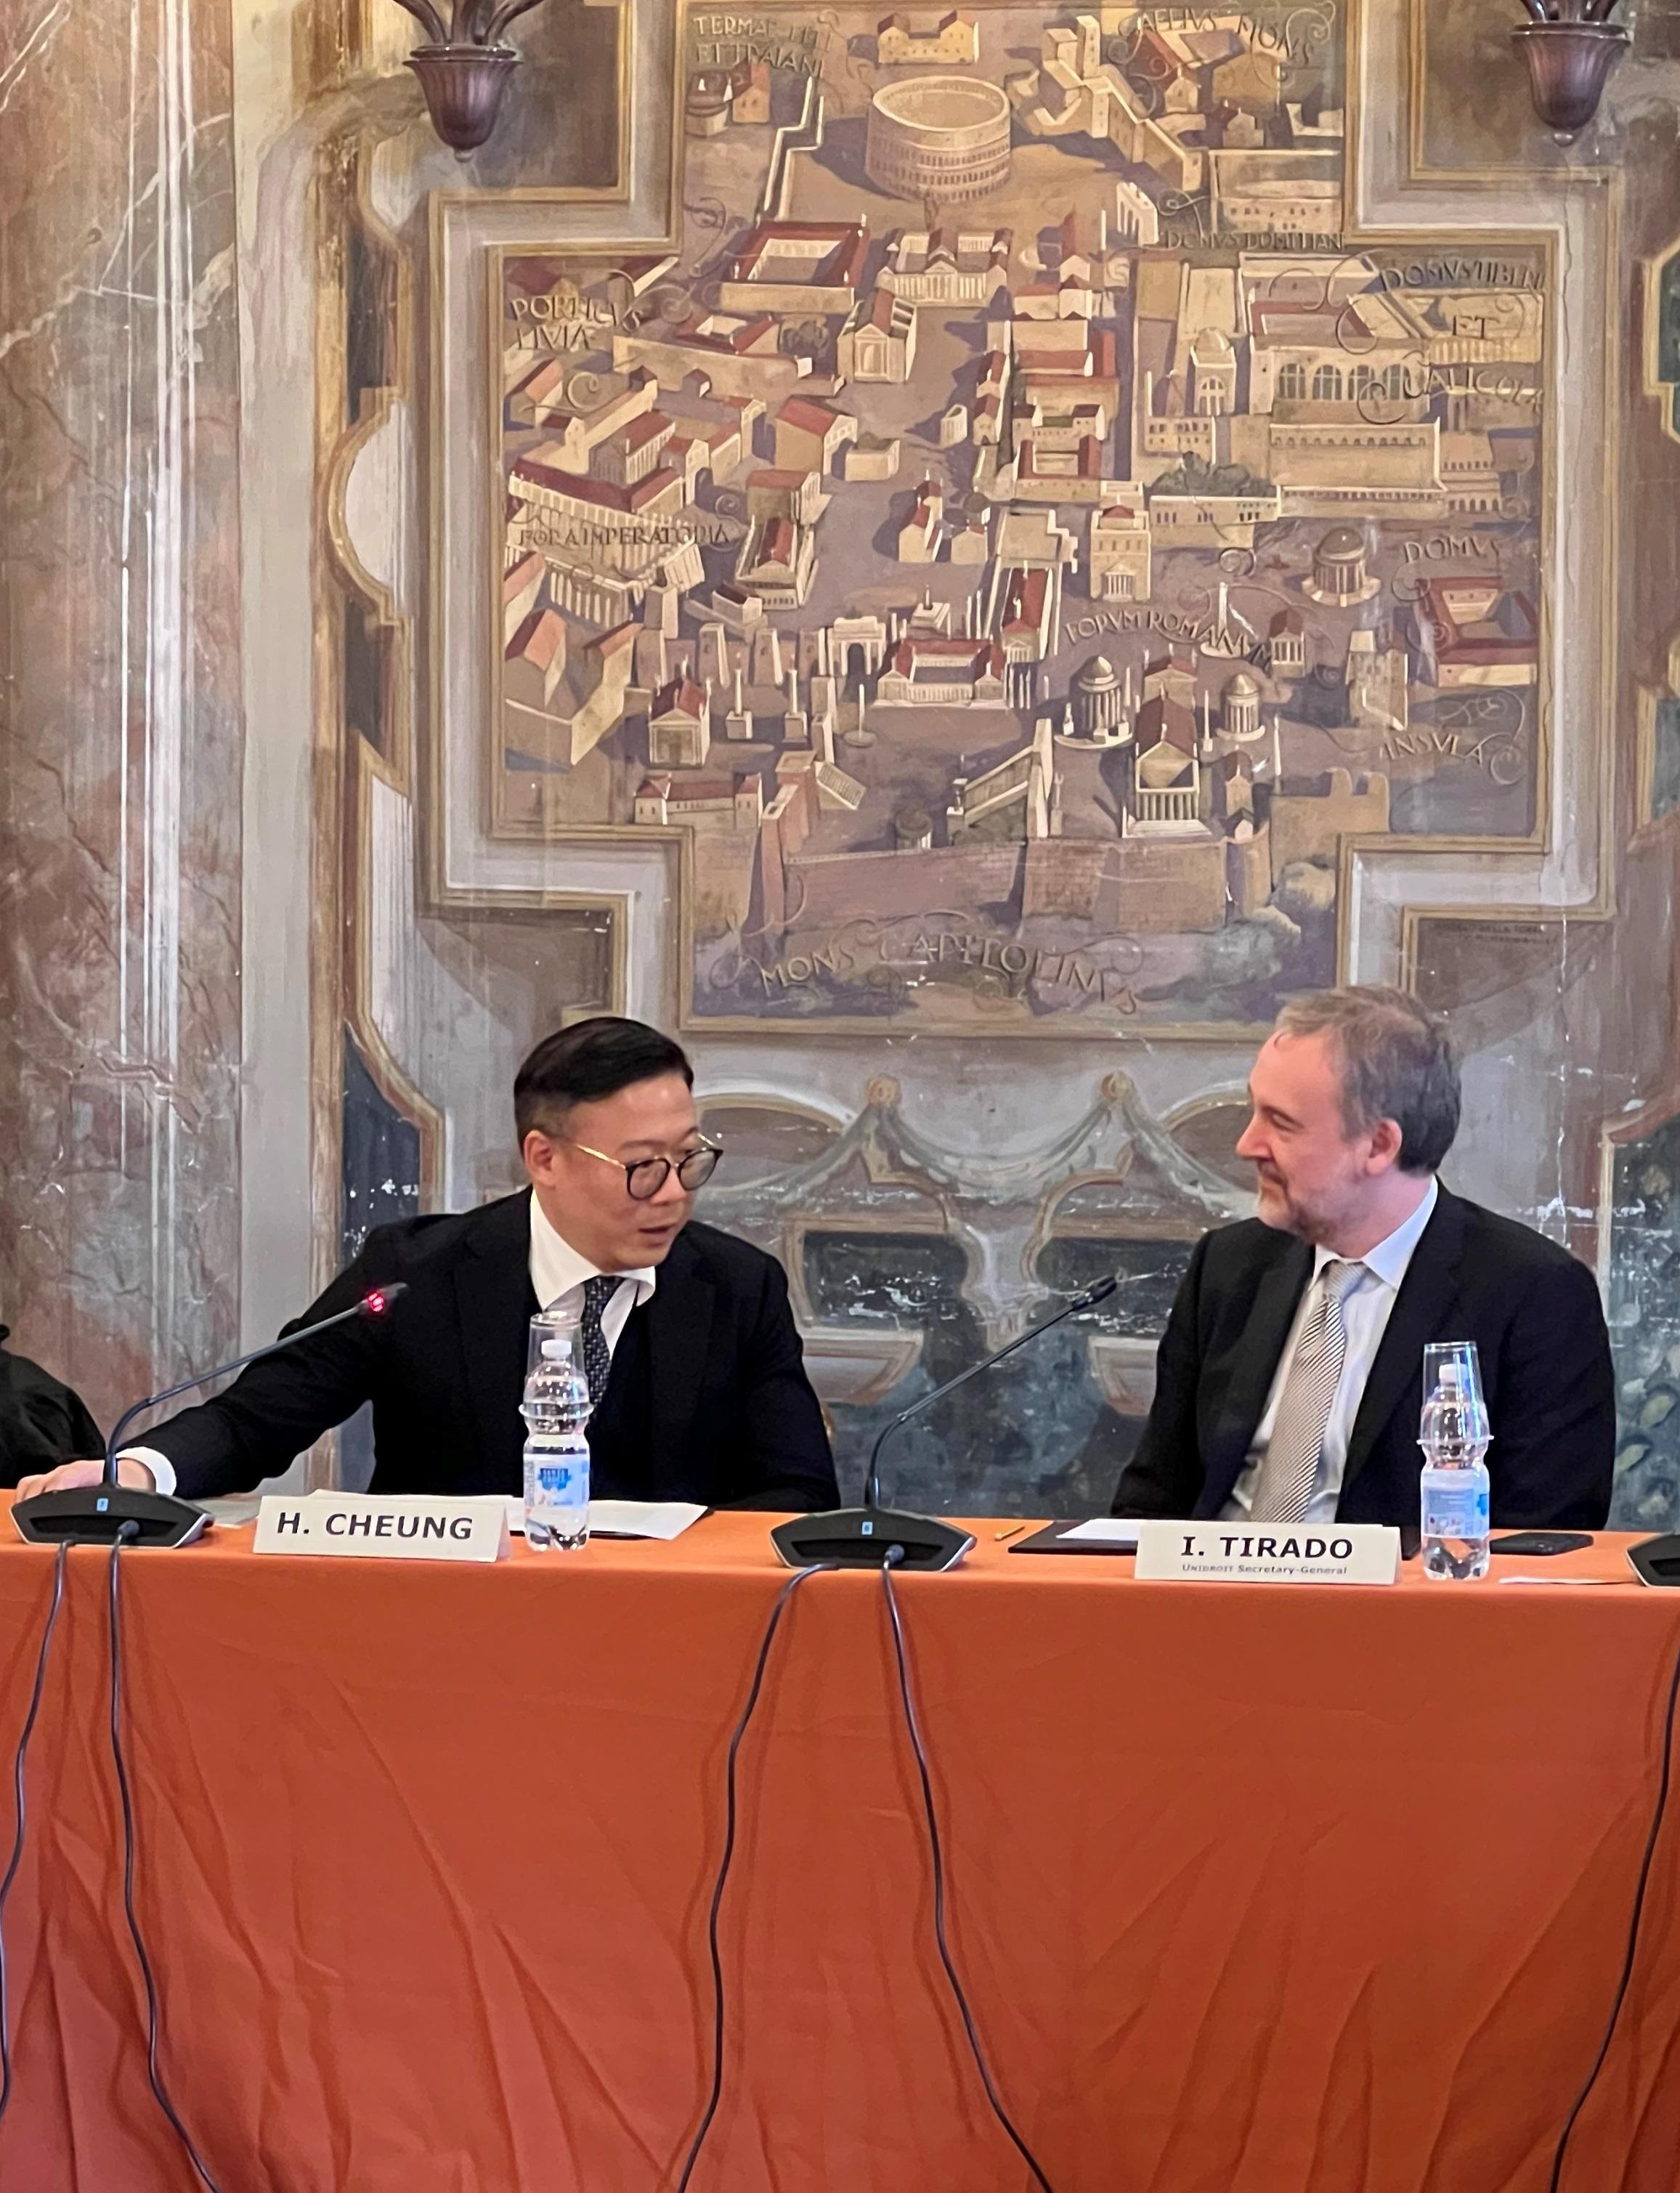 The Deputy Secretary for Justice, Mr Cheung Kwok-kwan, met with the Secretary-General of the International Institute for the Unification of Private Law (UNIDROIT), Professor Ignacio Tirado, and UNIDROIT's management in Rome, Italy, on March 6 (Rome time). Photo shows Mr Cheung (left) and Professor Tirado (right) exchanging views on more collaboration opportunities between UNIDROIT and Hong Kong.